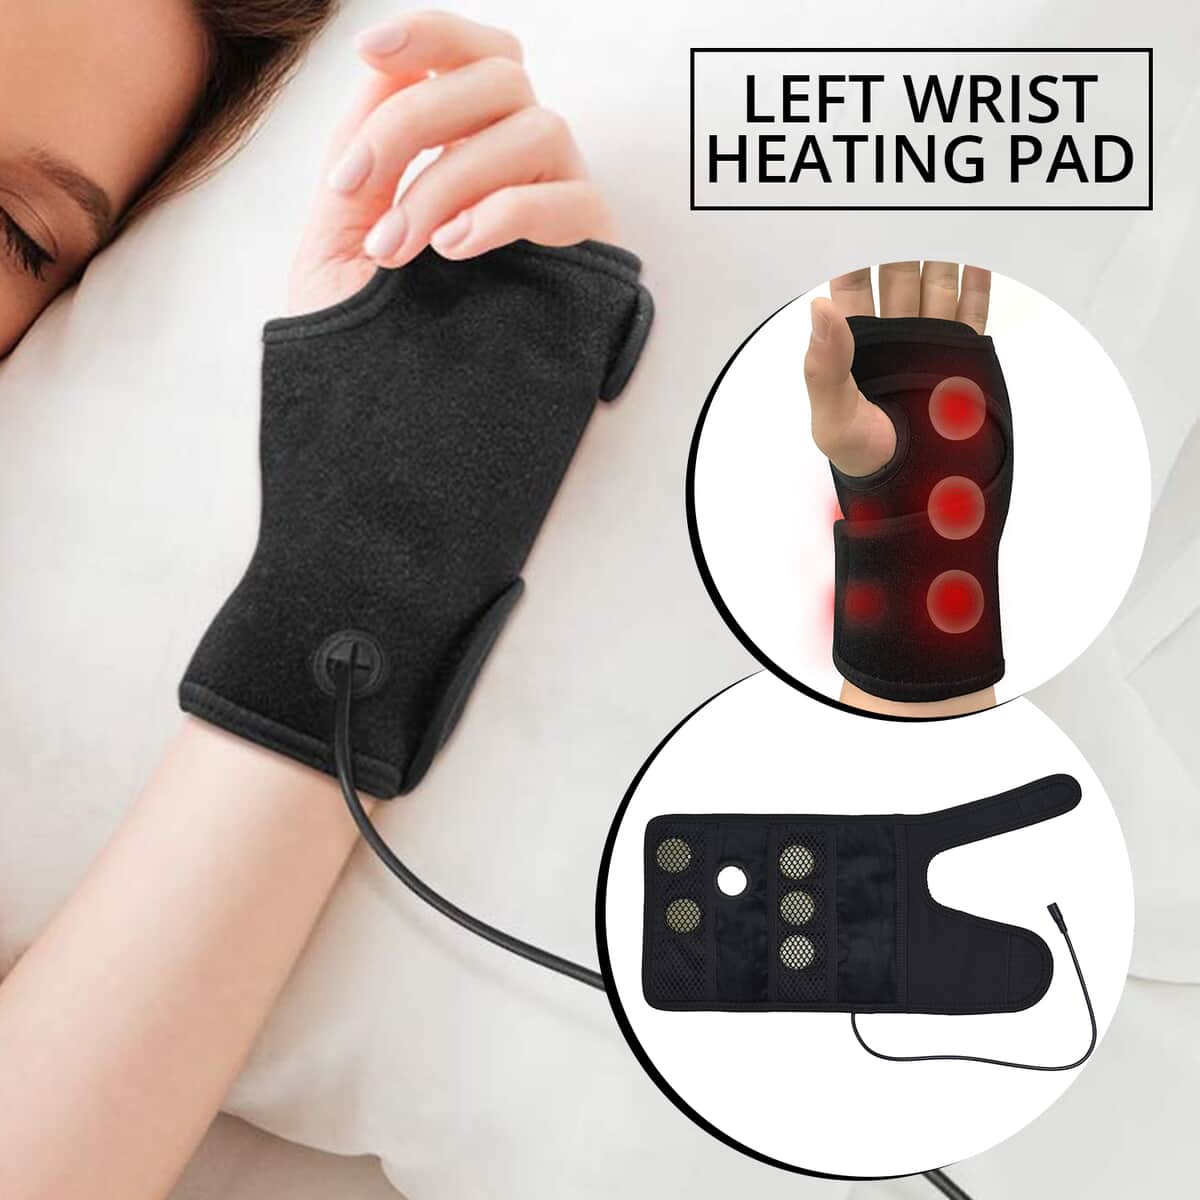 UTK DC Natural Jade Wrist Heating Pad Wraps for Carpal Tunnel (Left) with Faux Leather and PP Cotton image number 1